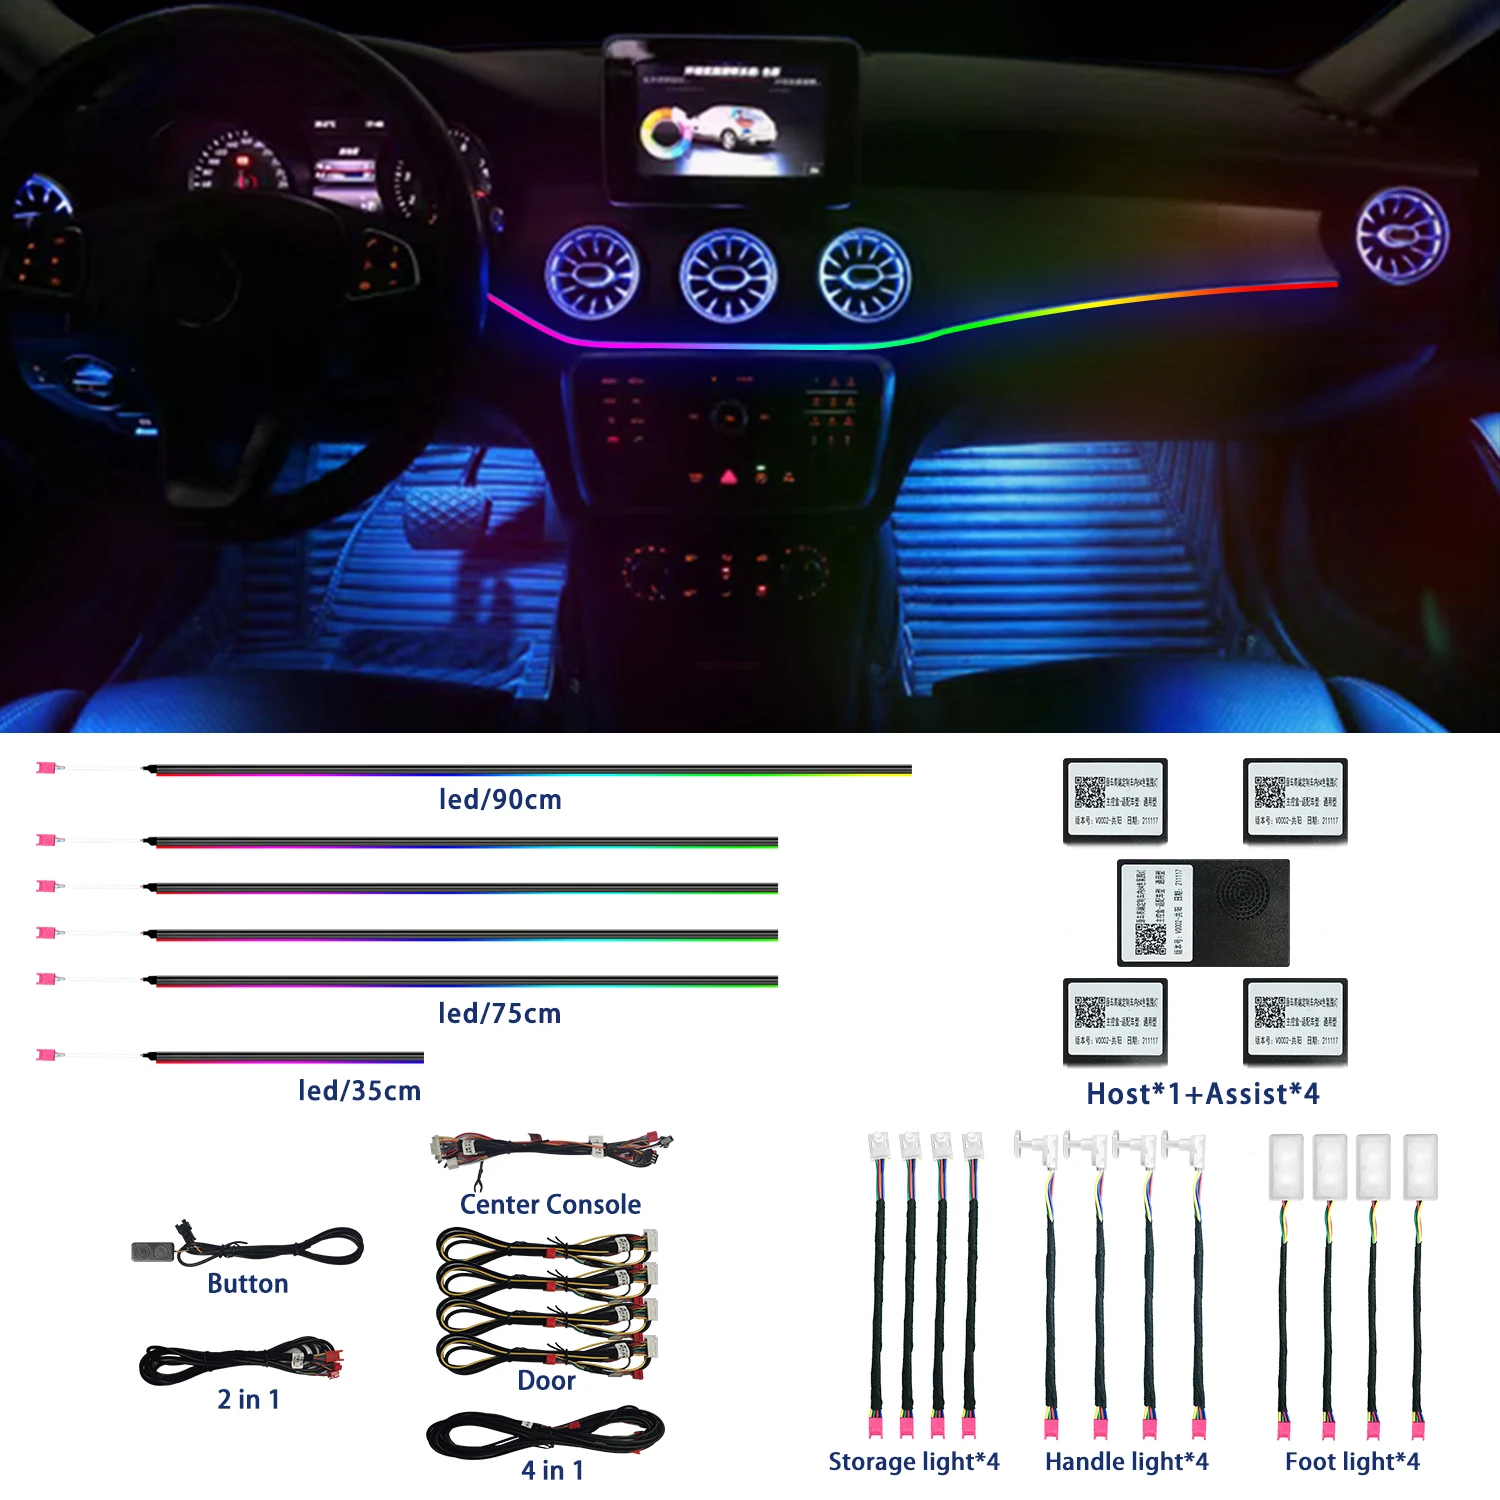 B symphony car ambient interior led universal multiple modes decoration atmosphere thumb155 crop